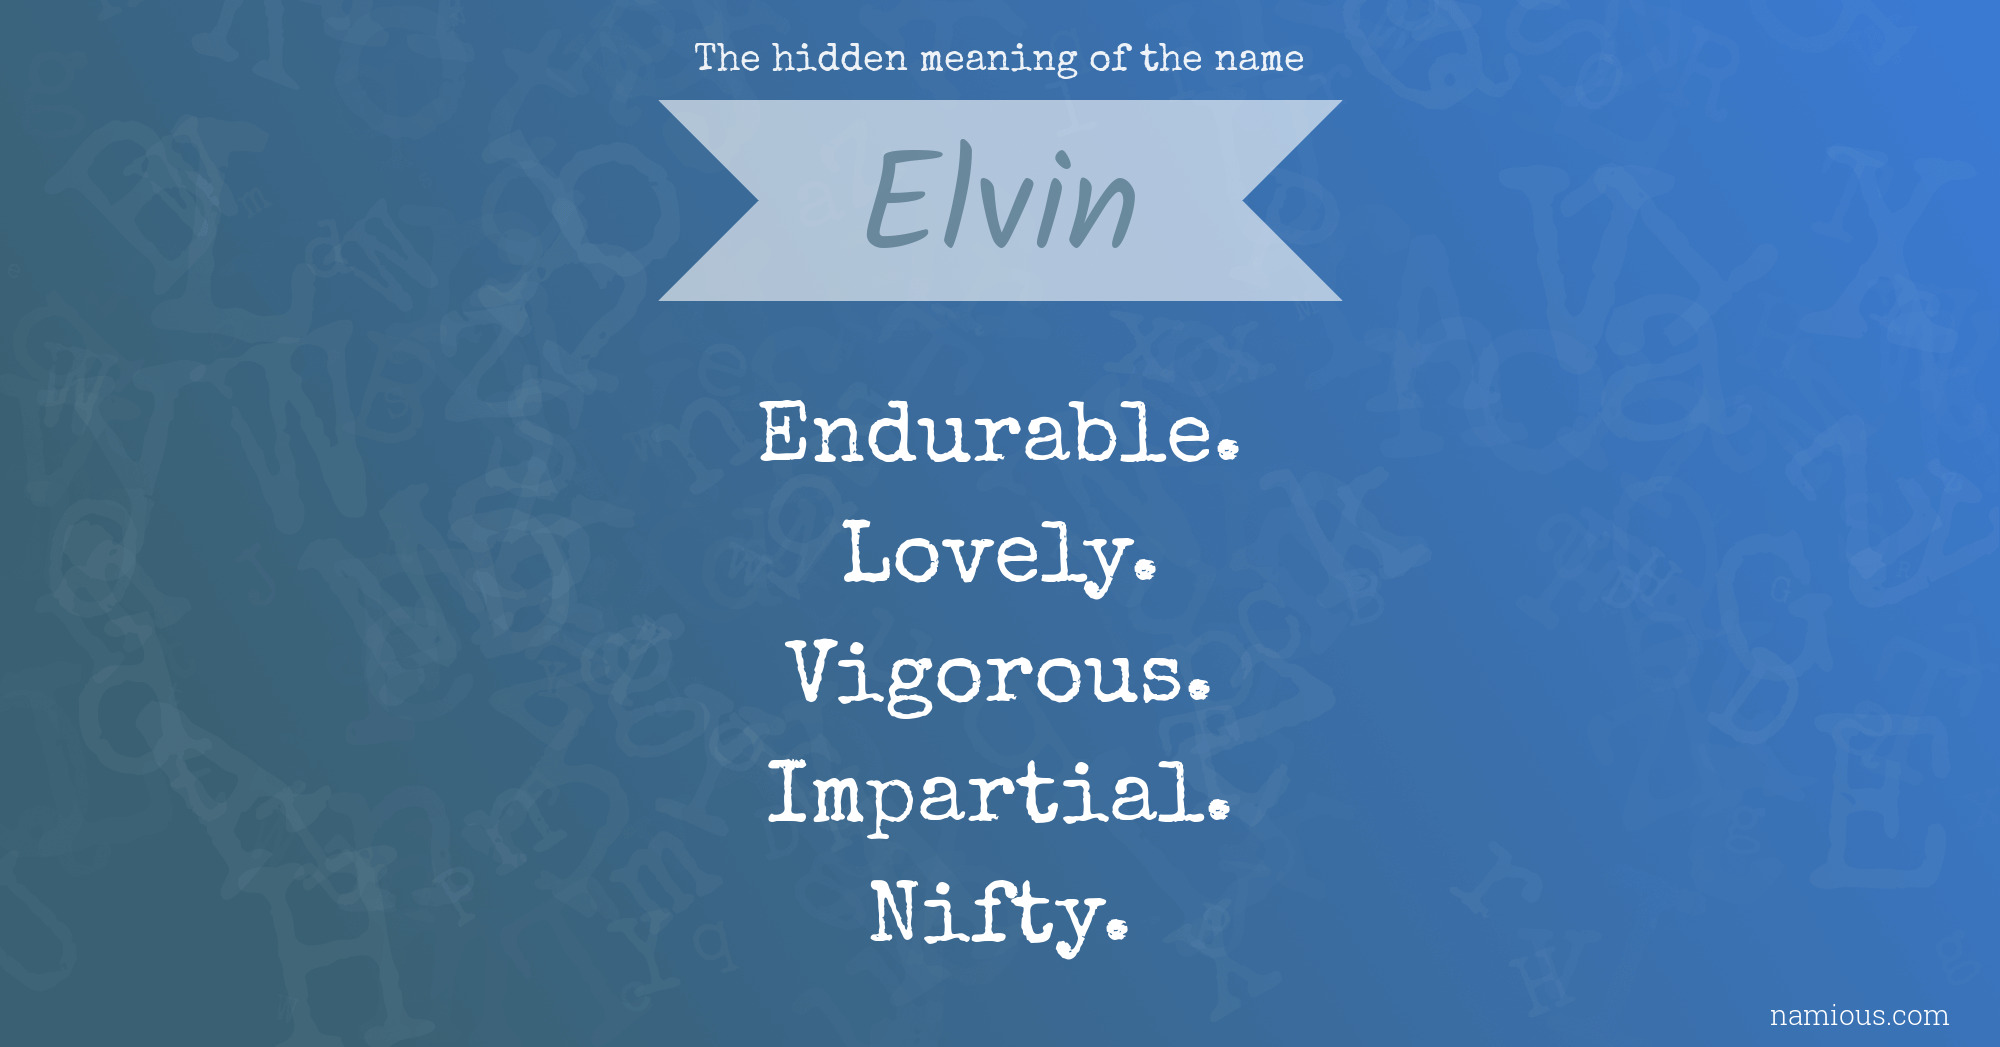 The hidden meaning of the name Elvin